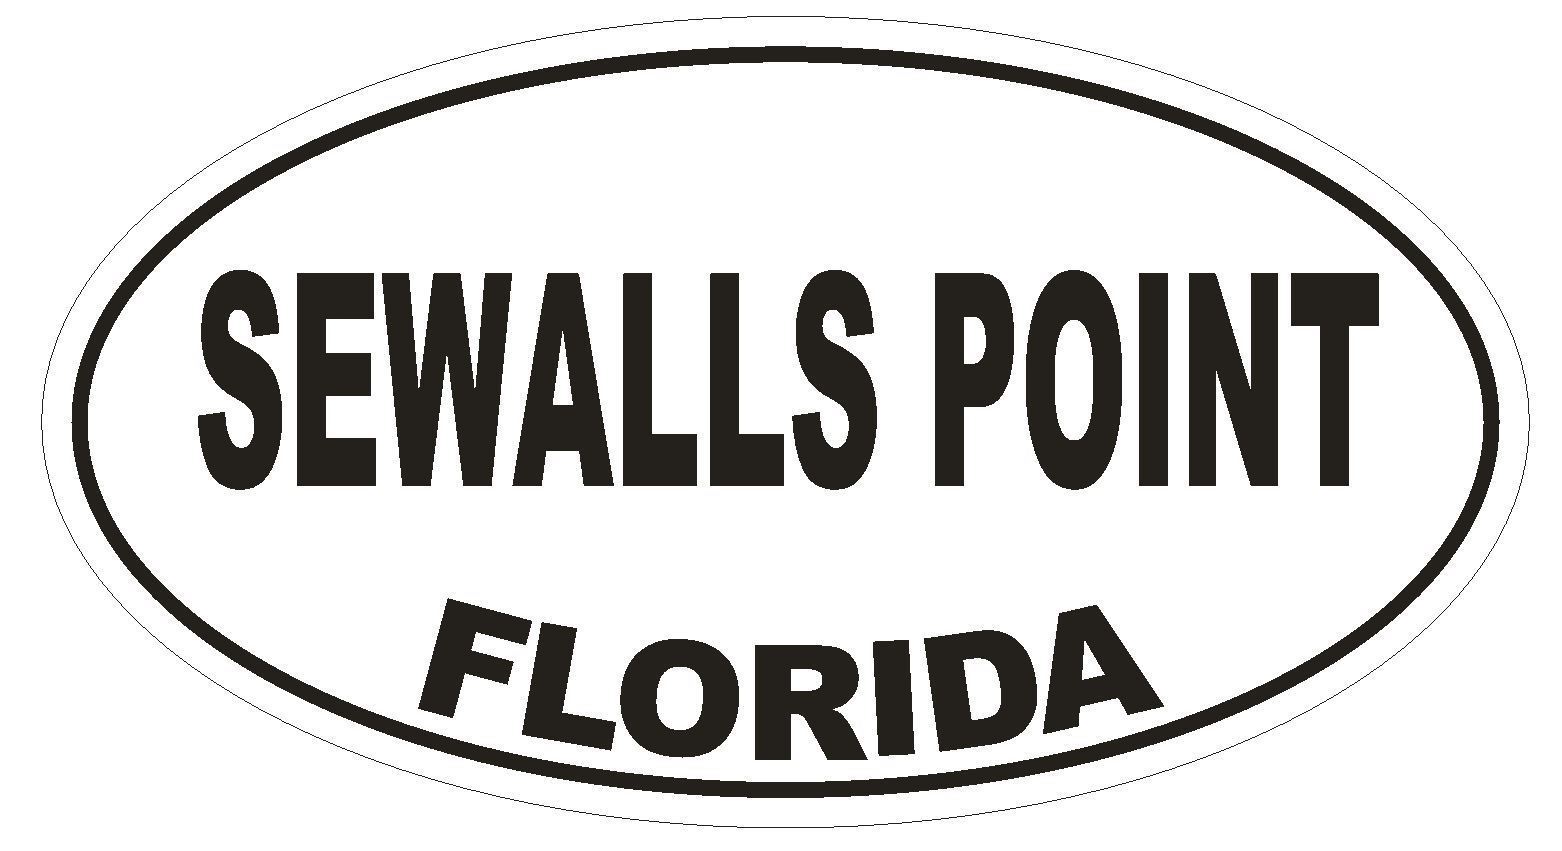 Primary image for Sewalls Point Florida Oval Bumper Sticker or Helmet Sticker D2737 Euro Decal